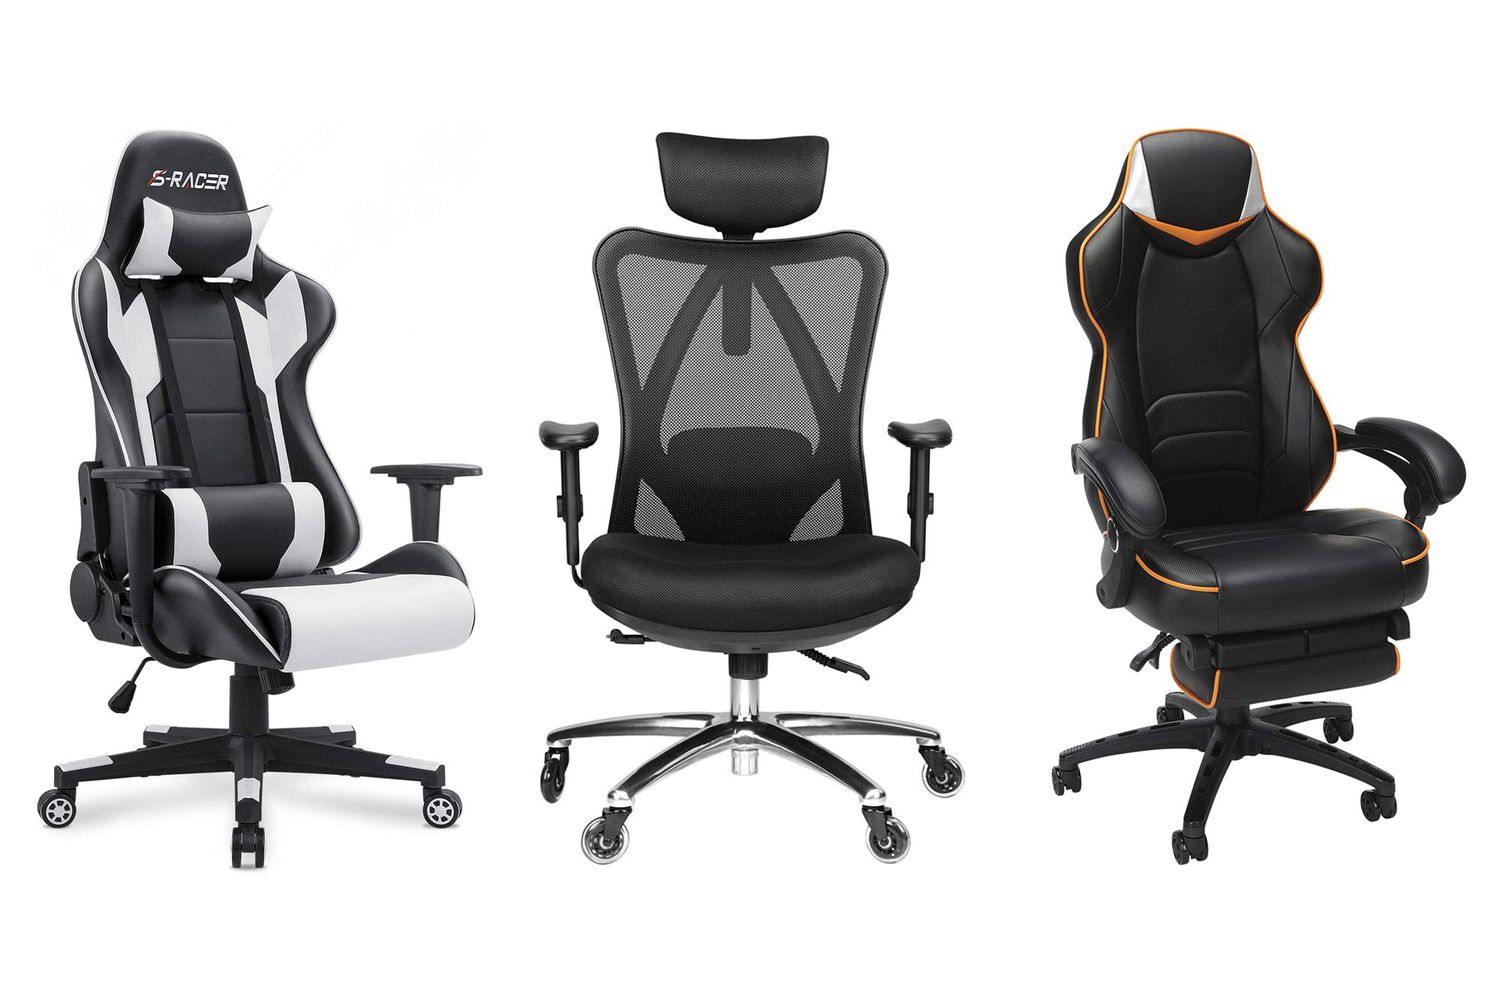 9 Best Gaming Chairs 2020, According to Editors | EW.com